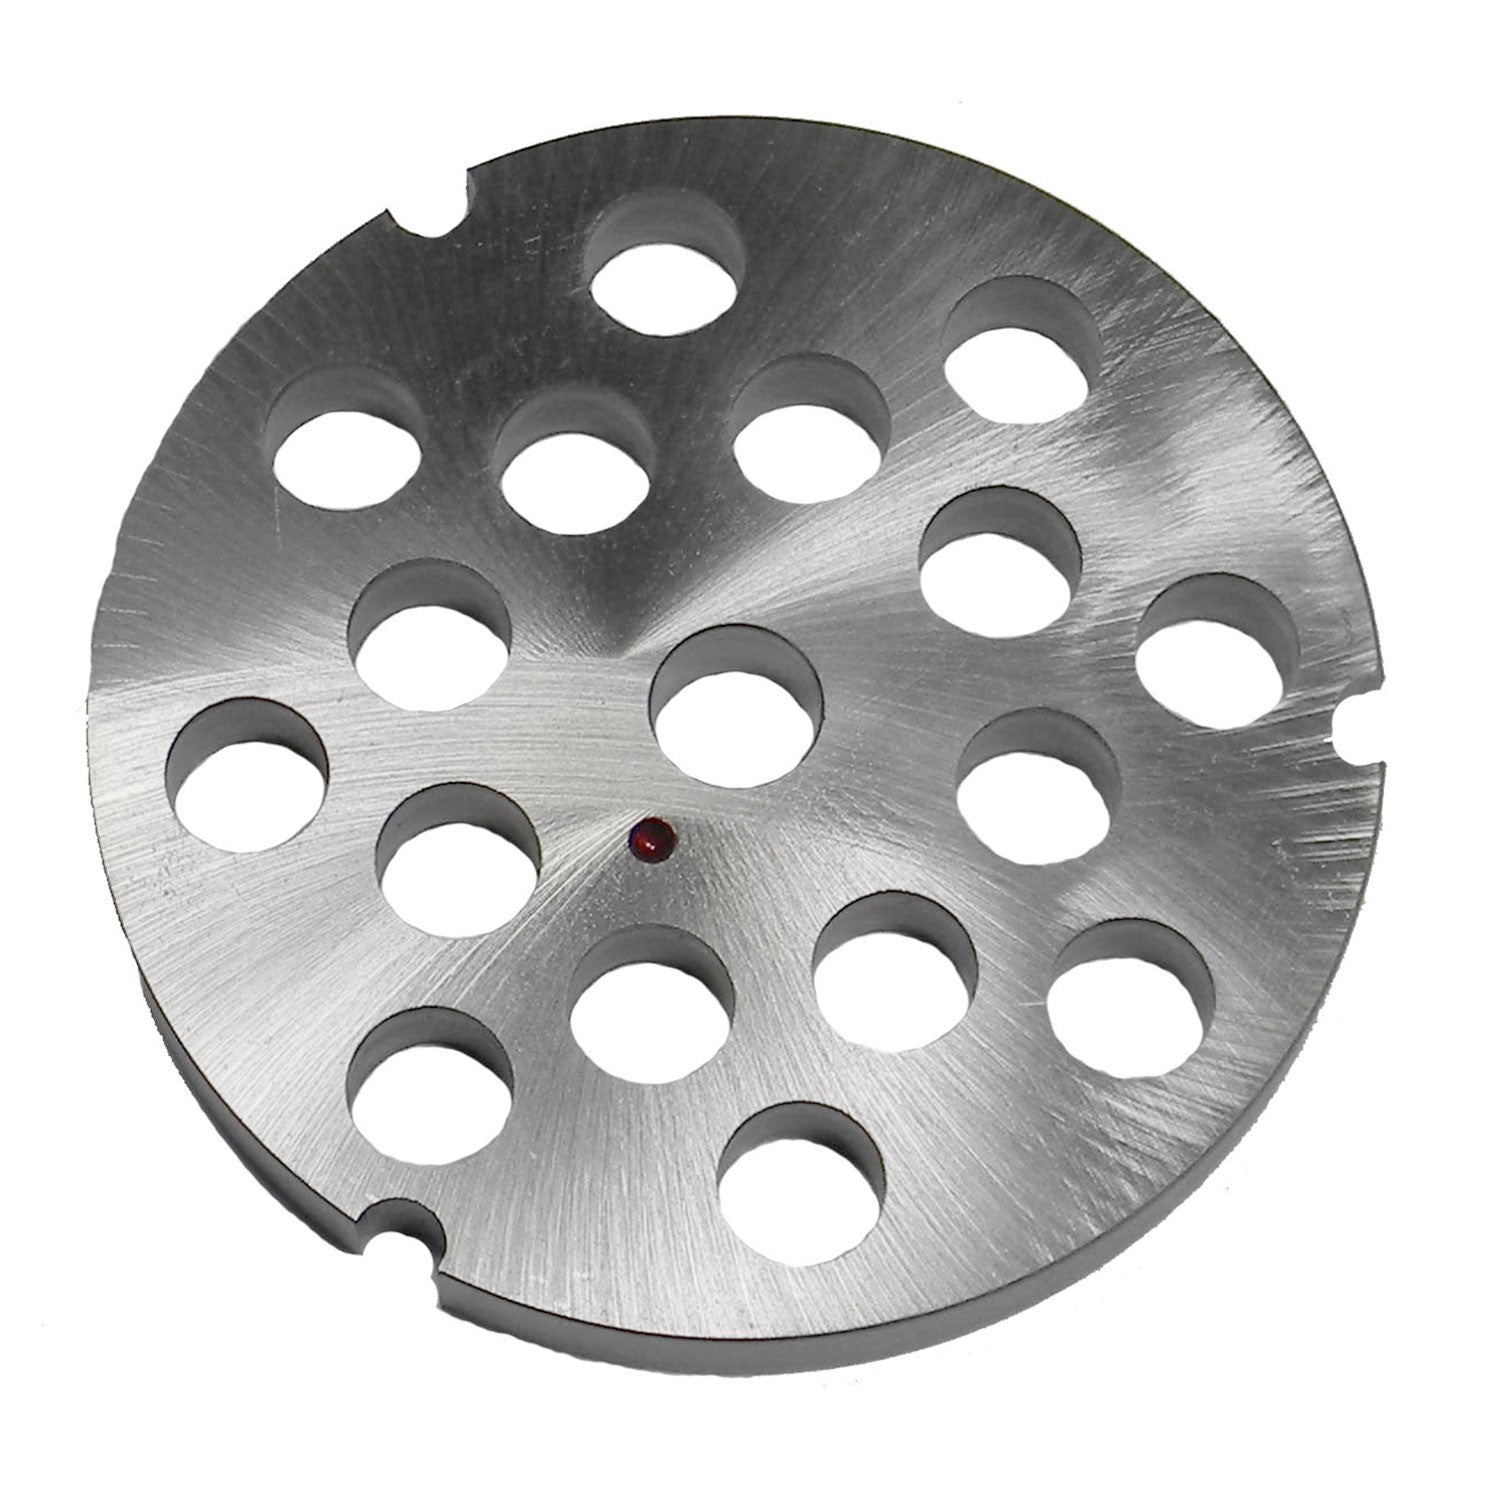 Size 32 DC Reversible Meat Grinder Plate, 1/2